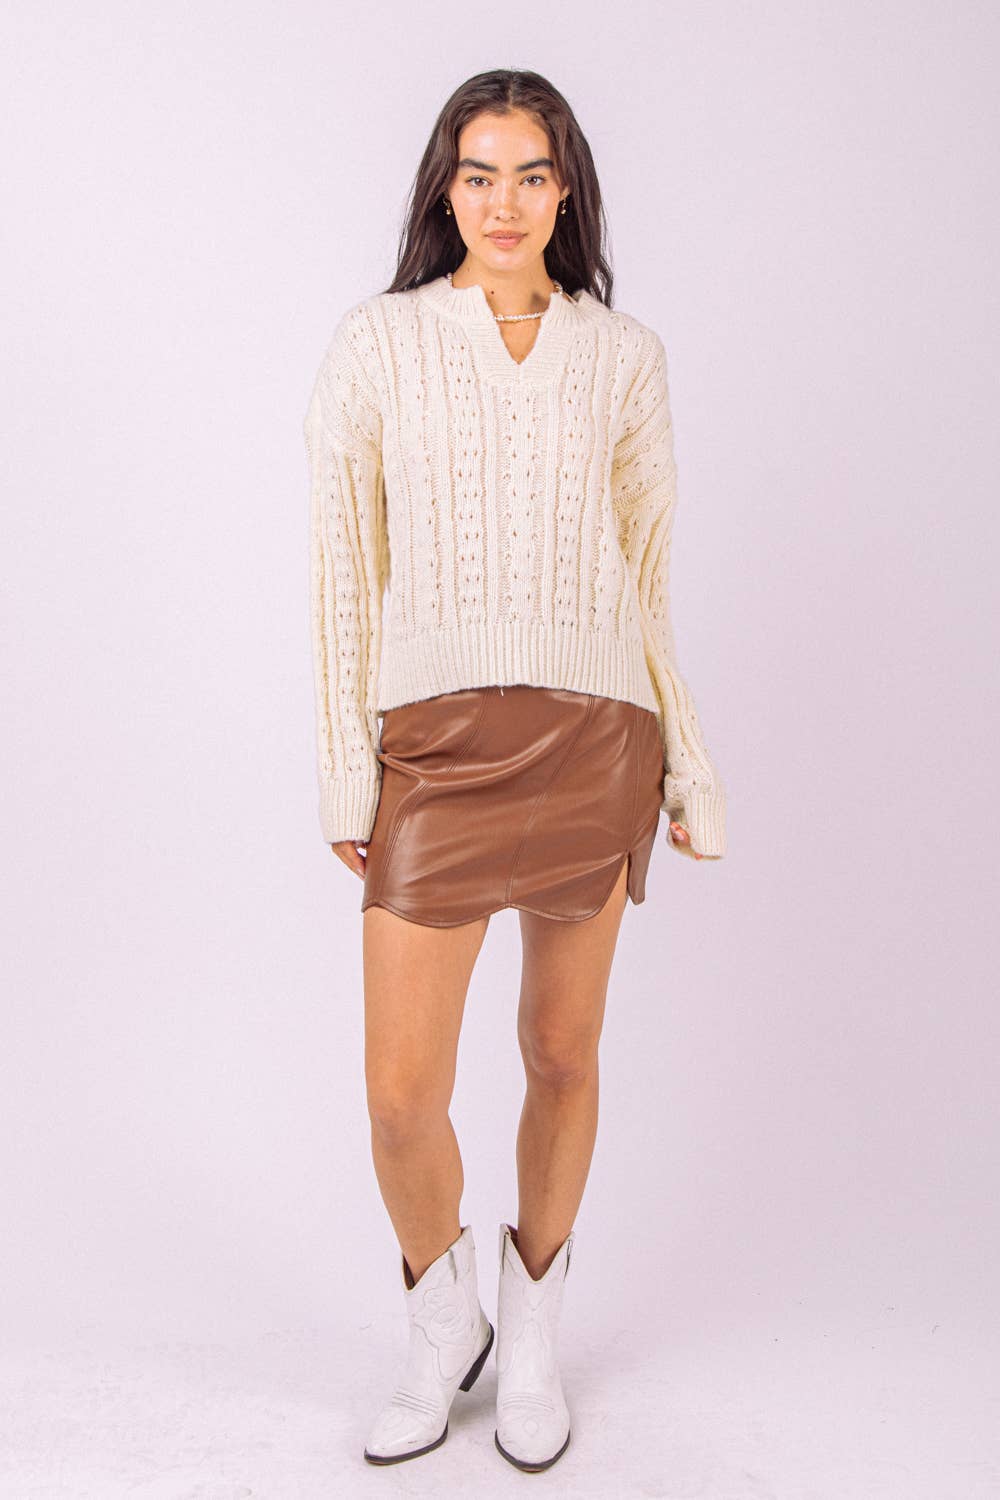 Faux Leather Skirt- Camel